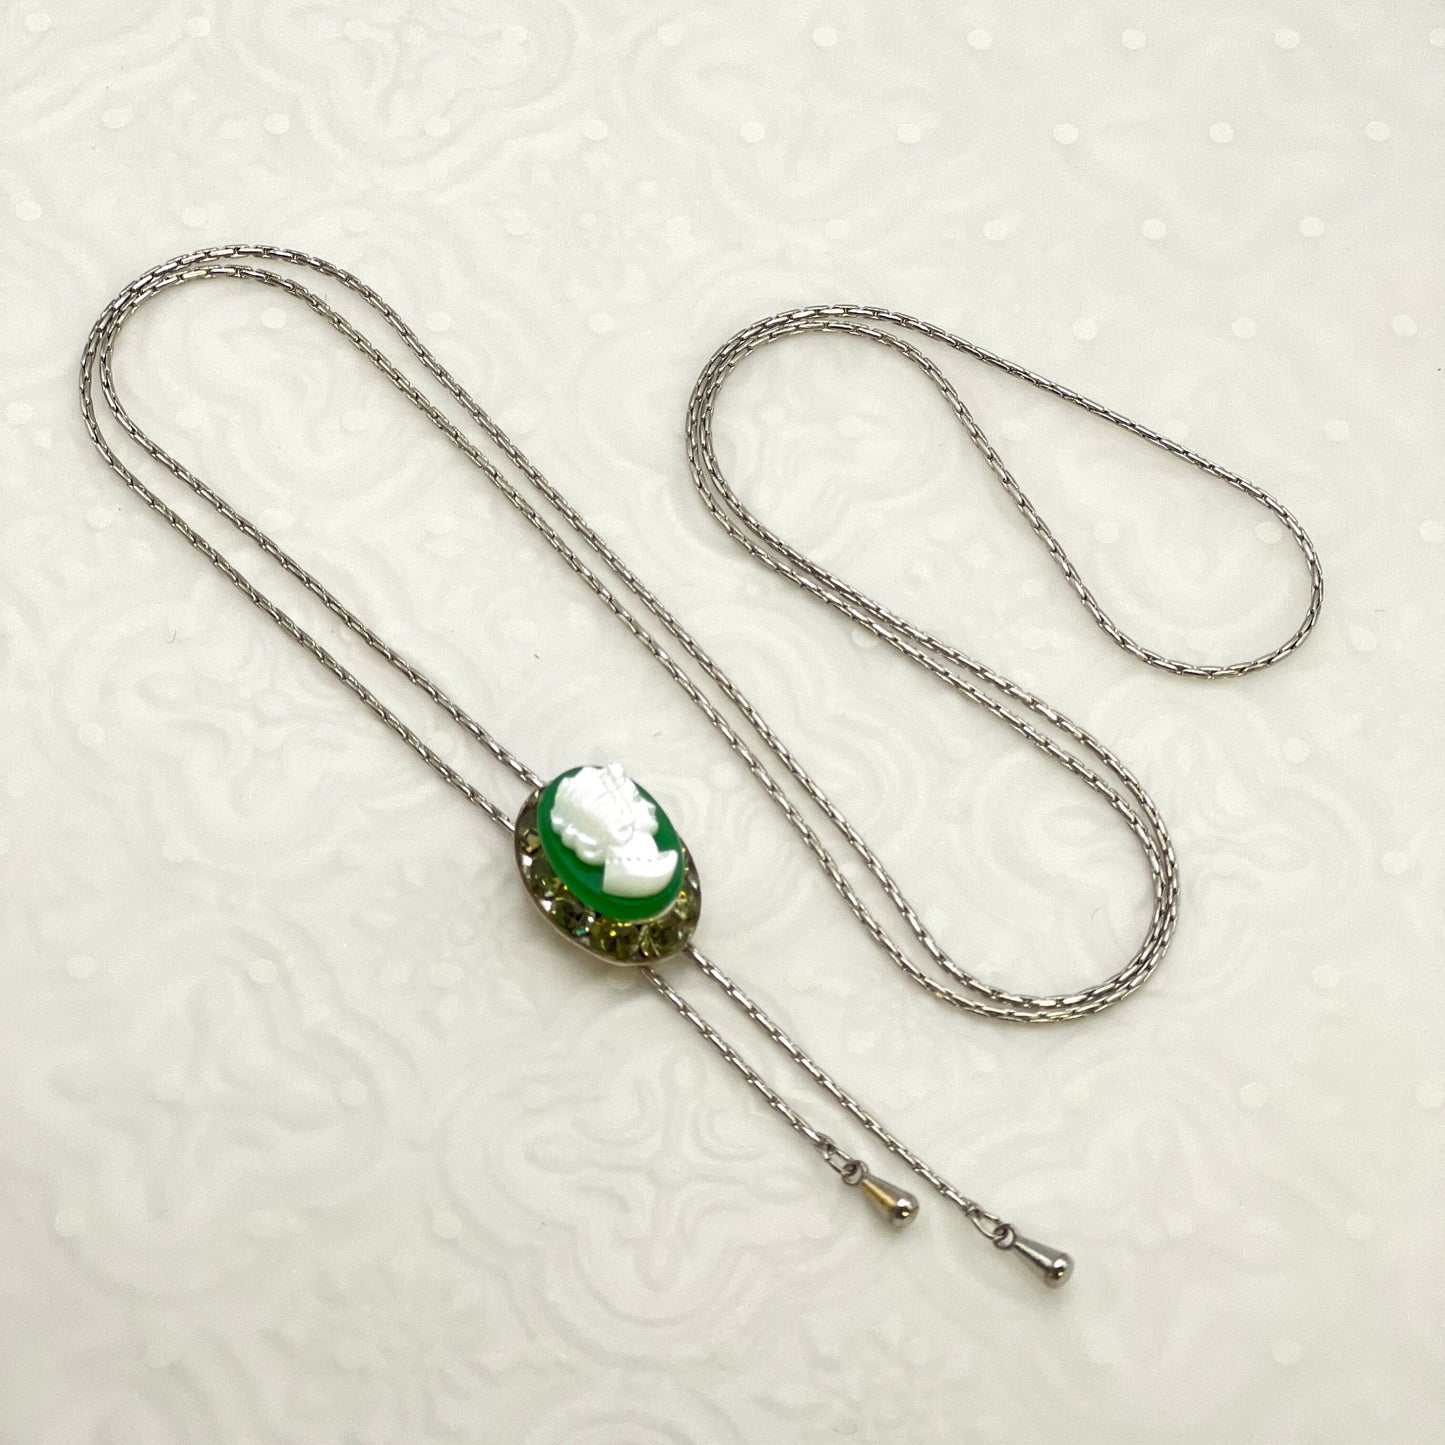 Dainty Mother of Pearl Cameo Necklace, Vintage Shell Cameo Jewelry, Green Onyx Jewelry, Unique Gifts for Women, Graduation Gifts